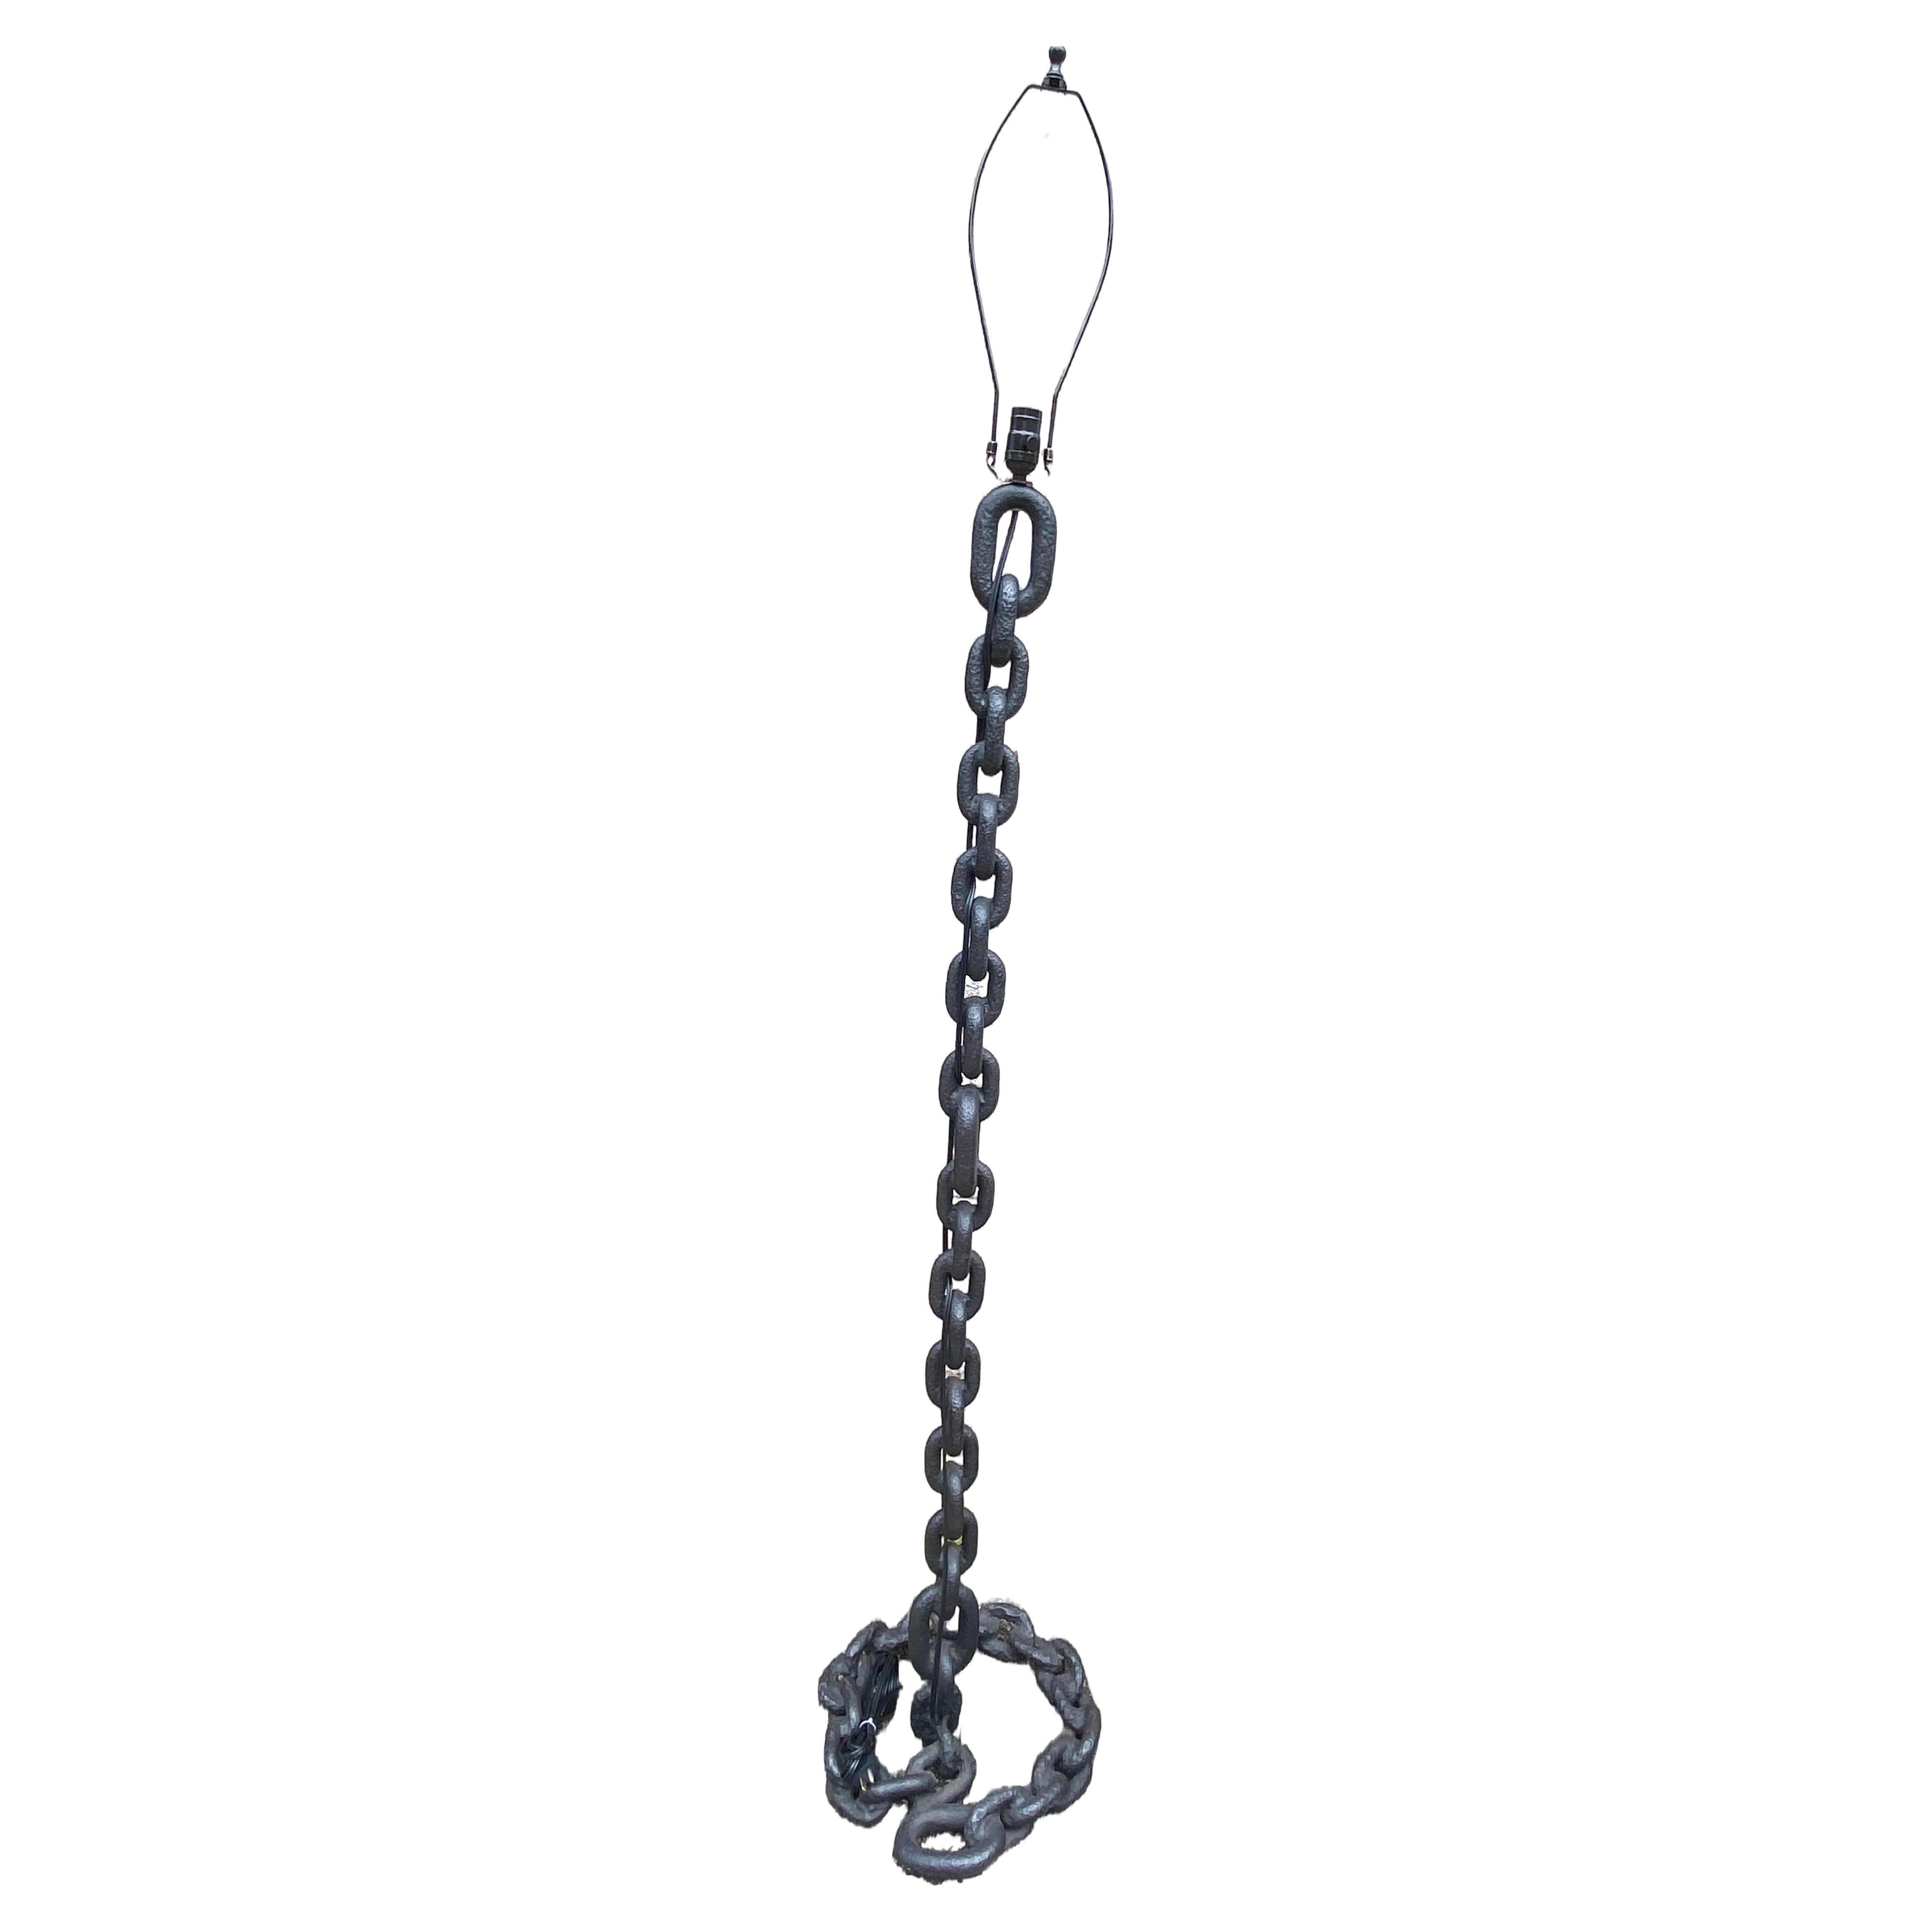 Chain Link Stehlampe